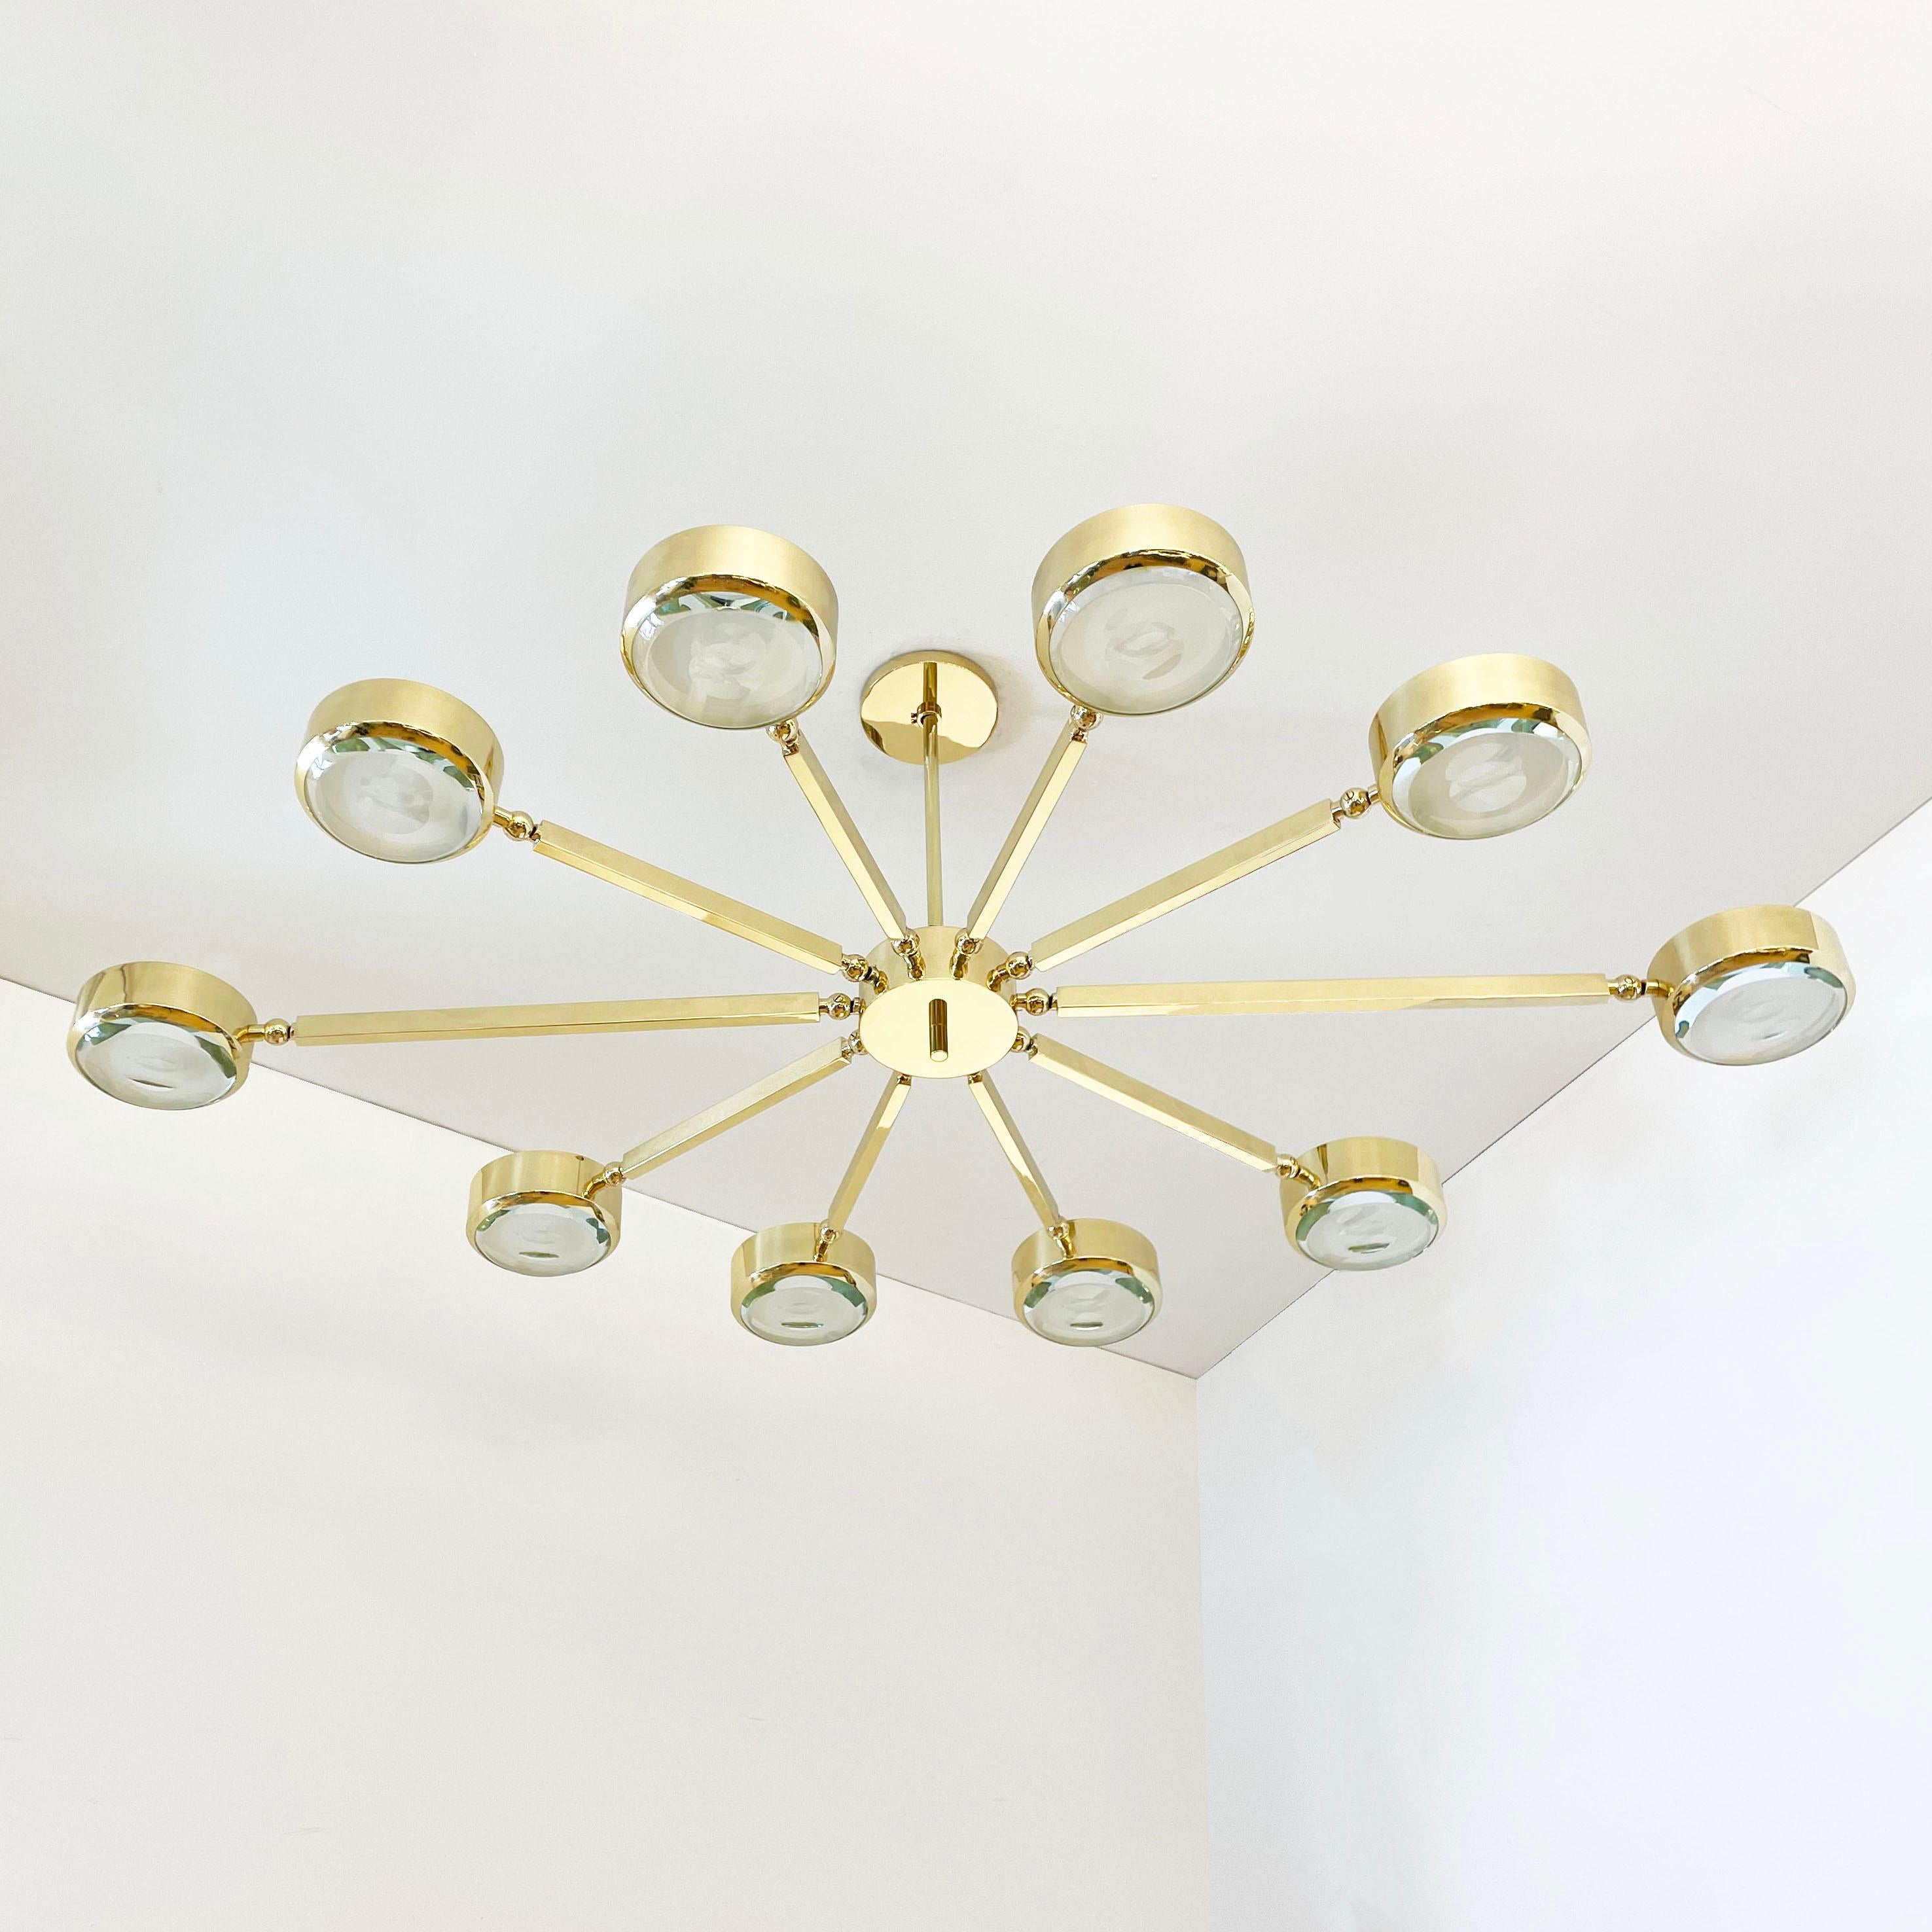 Oculus Oval Ceiling Light by Gaspare Asaro- Polished Nickel with Carved Glass For Sale 2